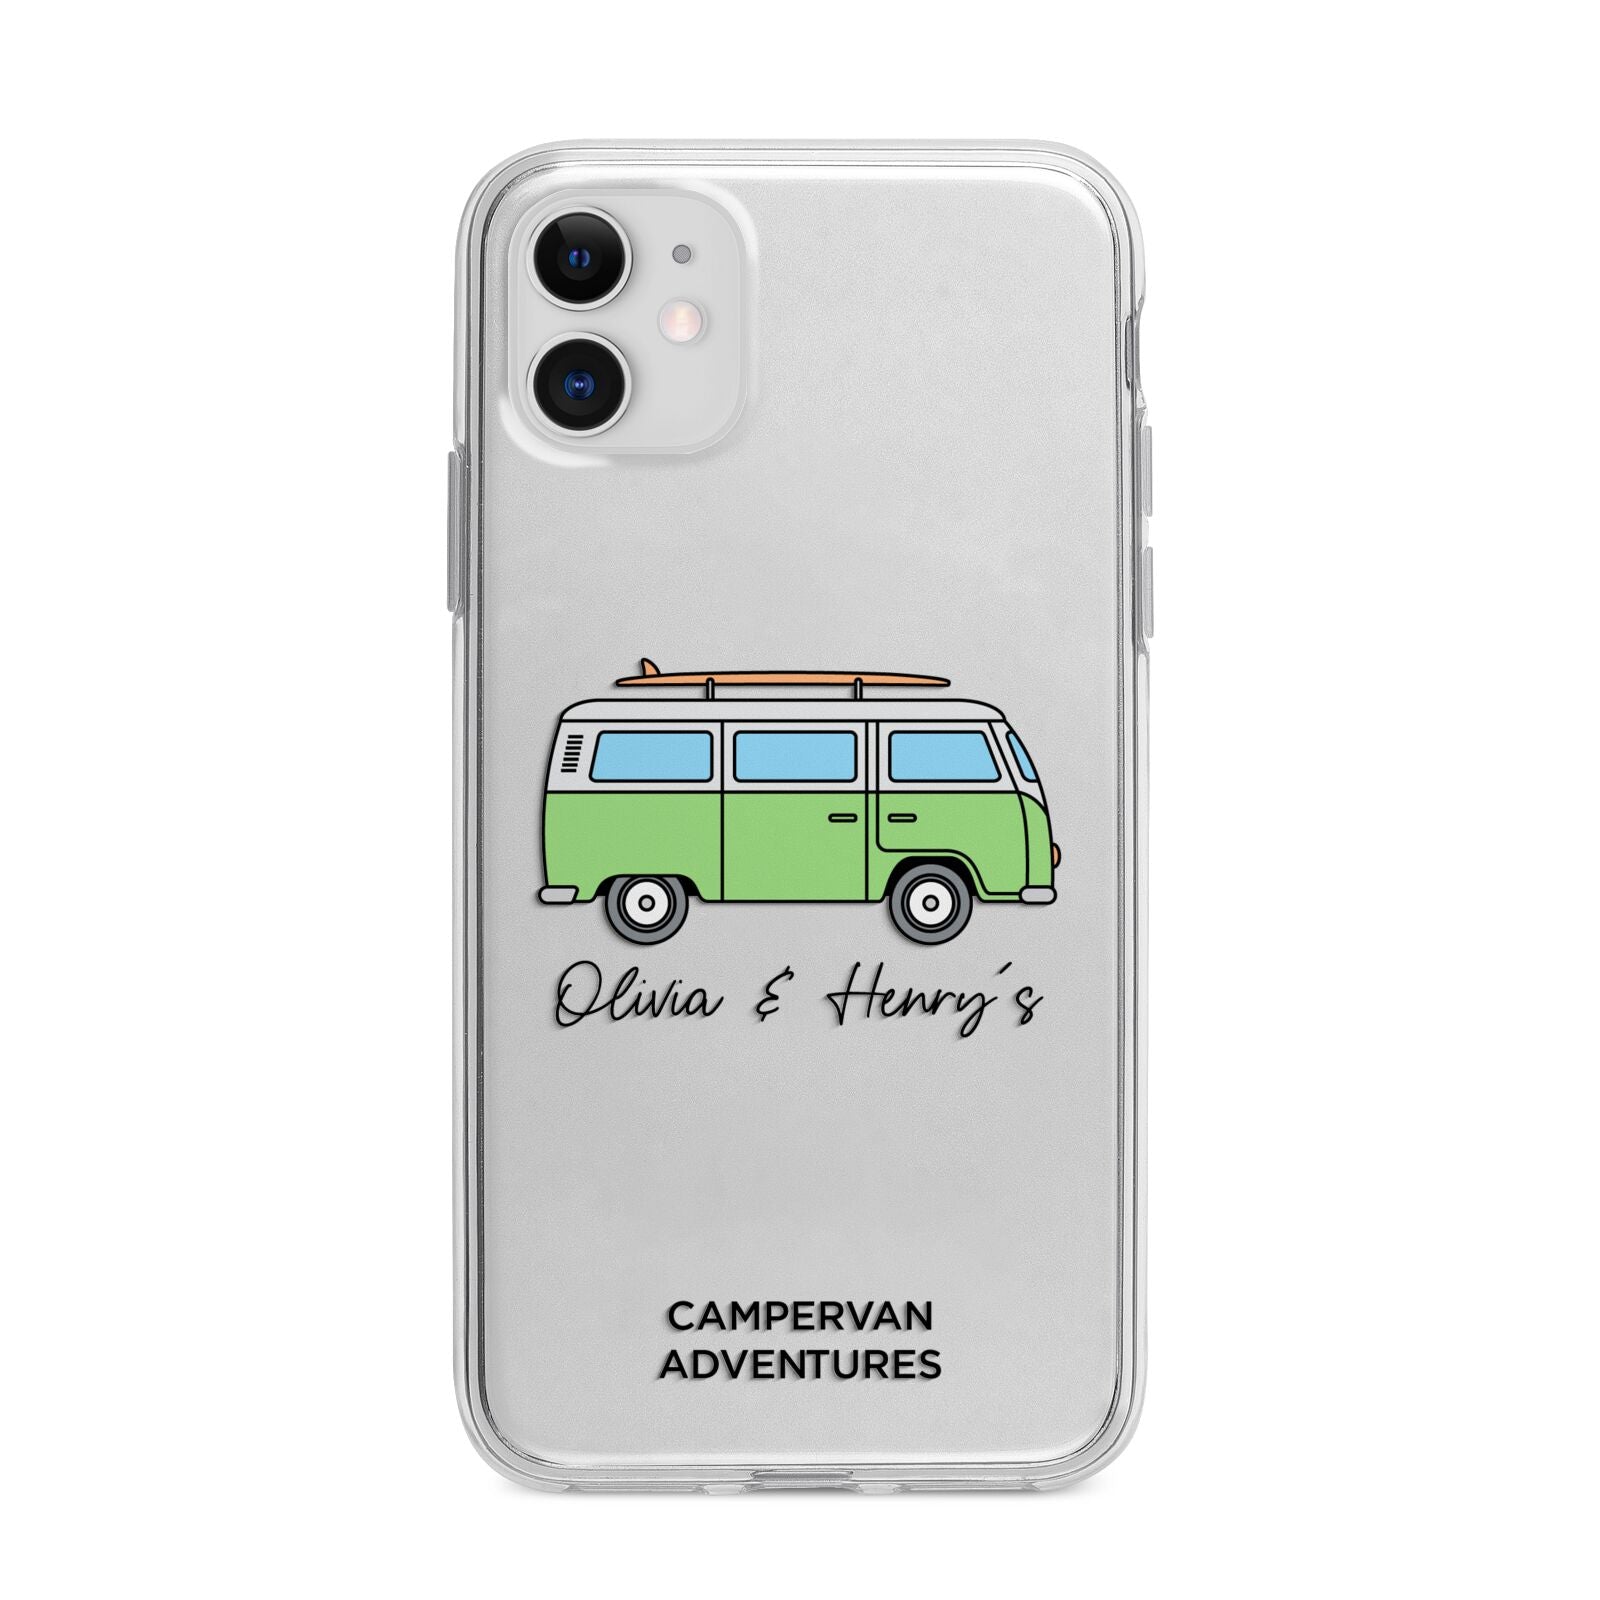 Green Bespoke Campervan Adventures Apple iPhone 11 in White with Bumper Case